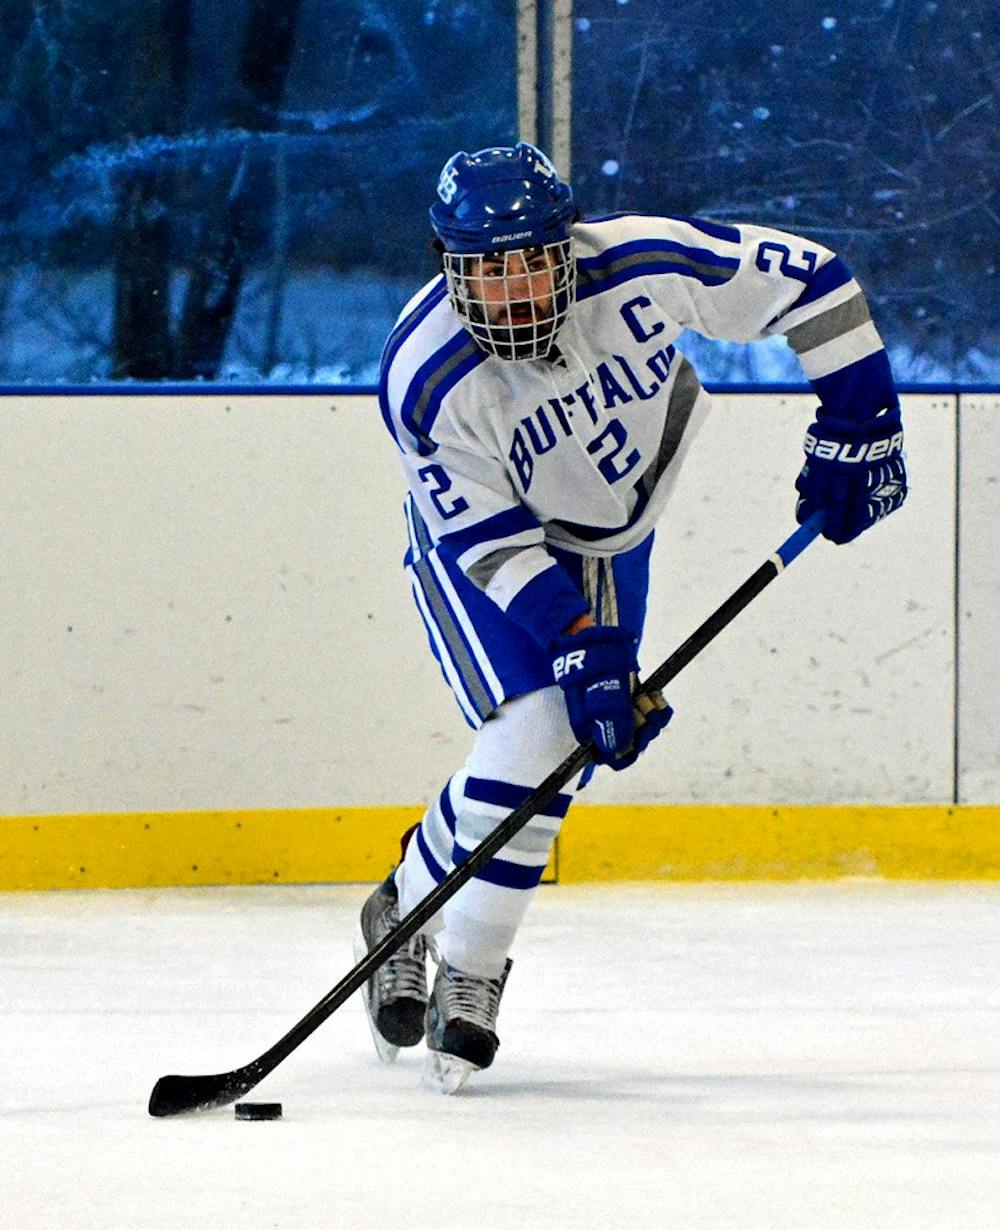 <p>Defenseman Sean Dungan glides through the ice with the puck secured by the stick. The UB hockey team got off to a fast start this season, holding a 2-0 record so far.</p>